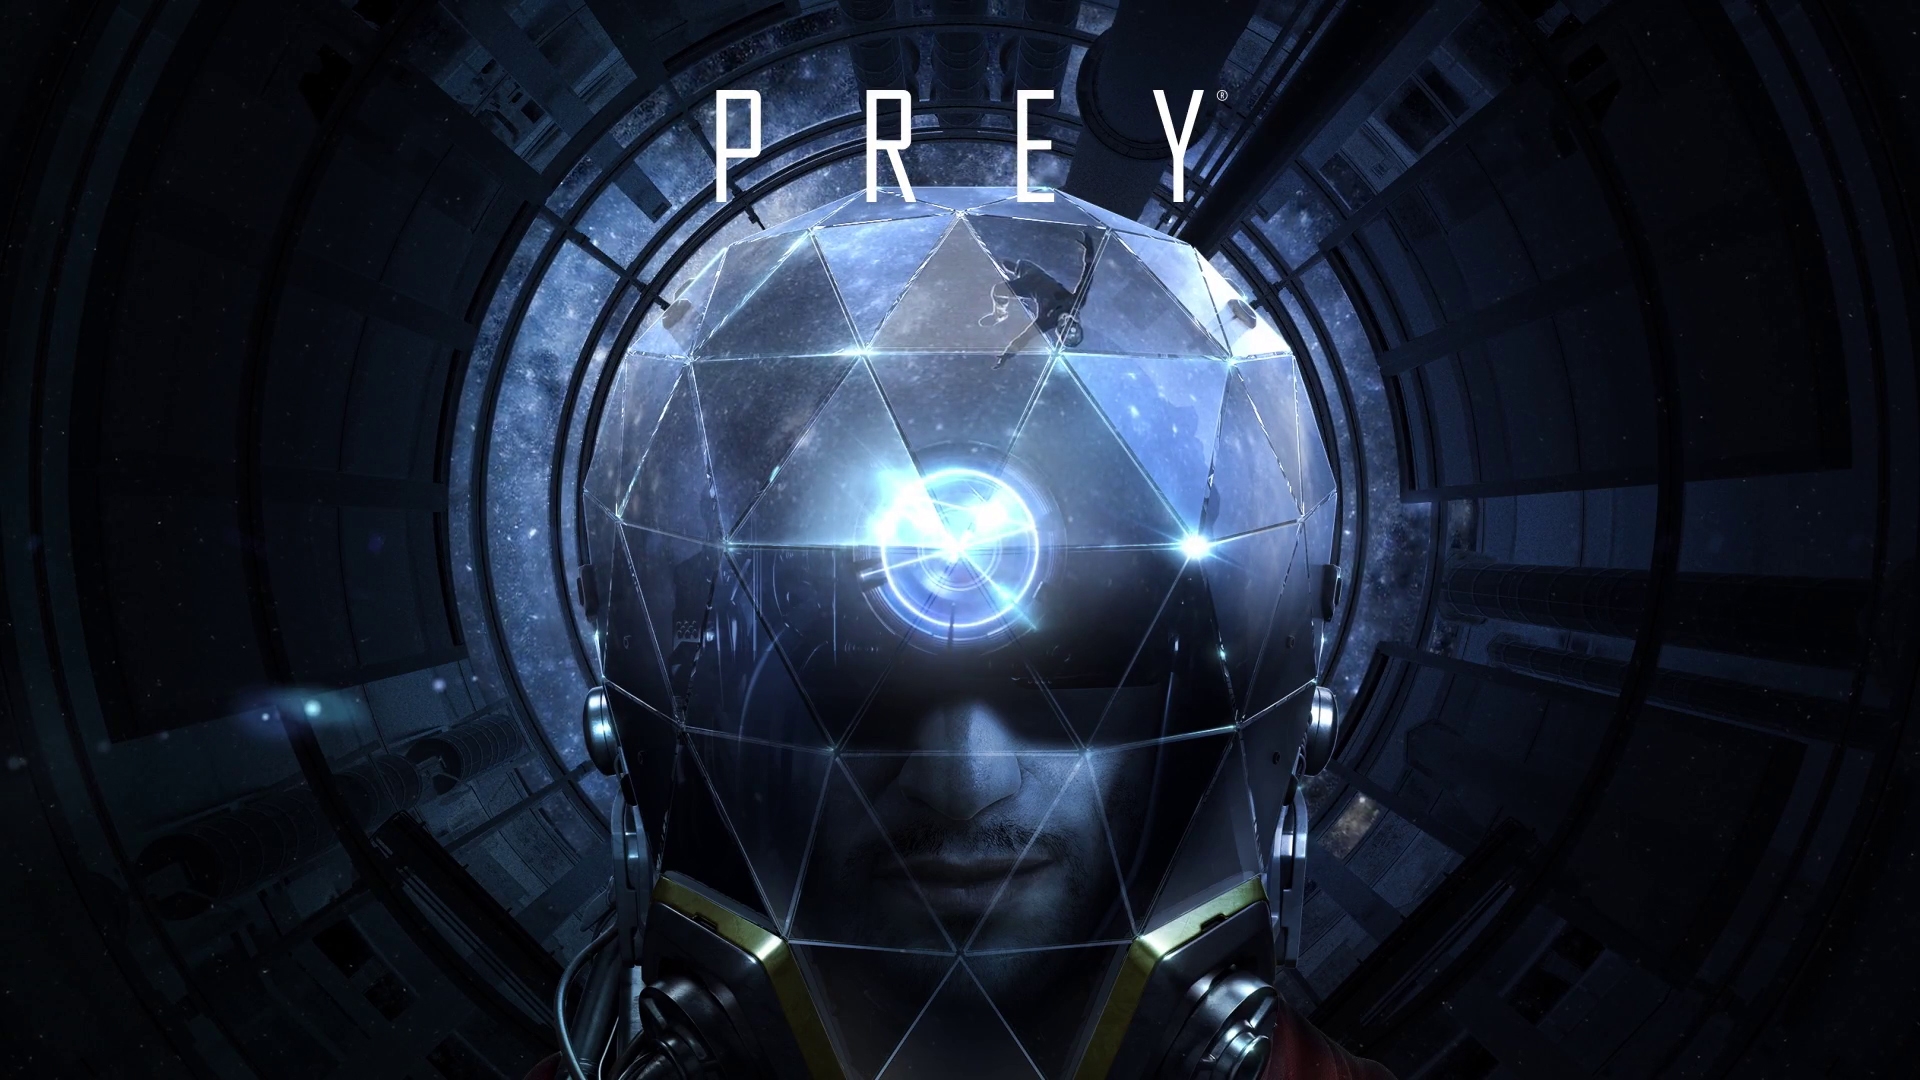 Prey Weapons, Gadgets, and Gear trailer > GamersBook